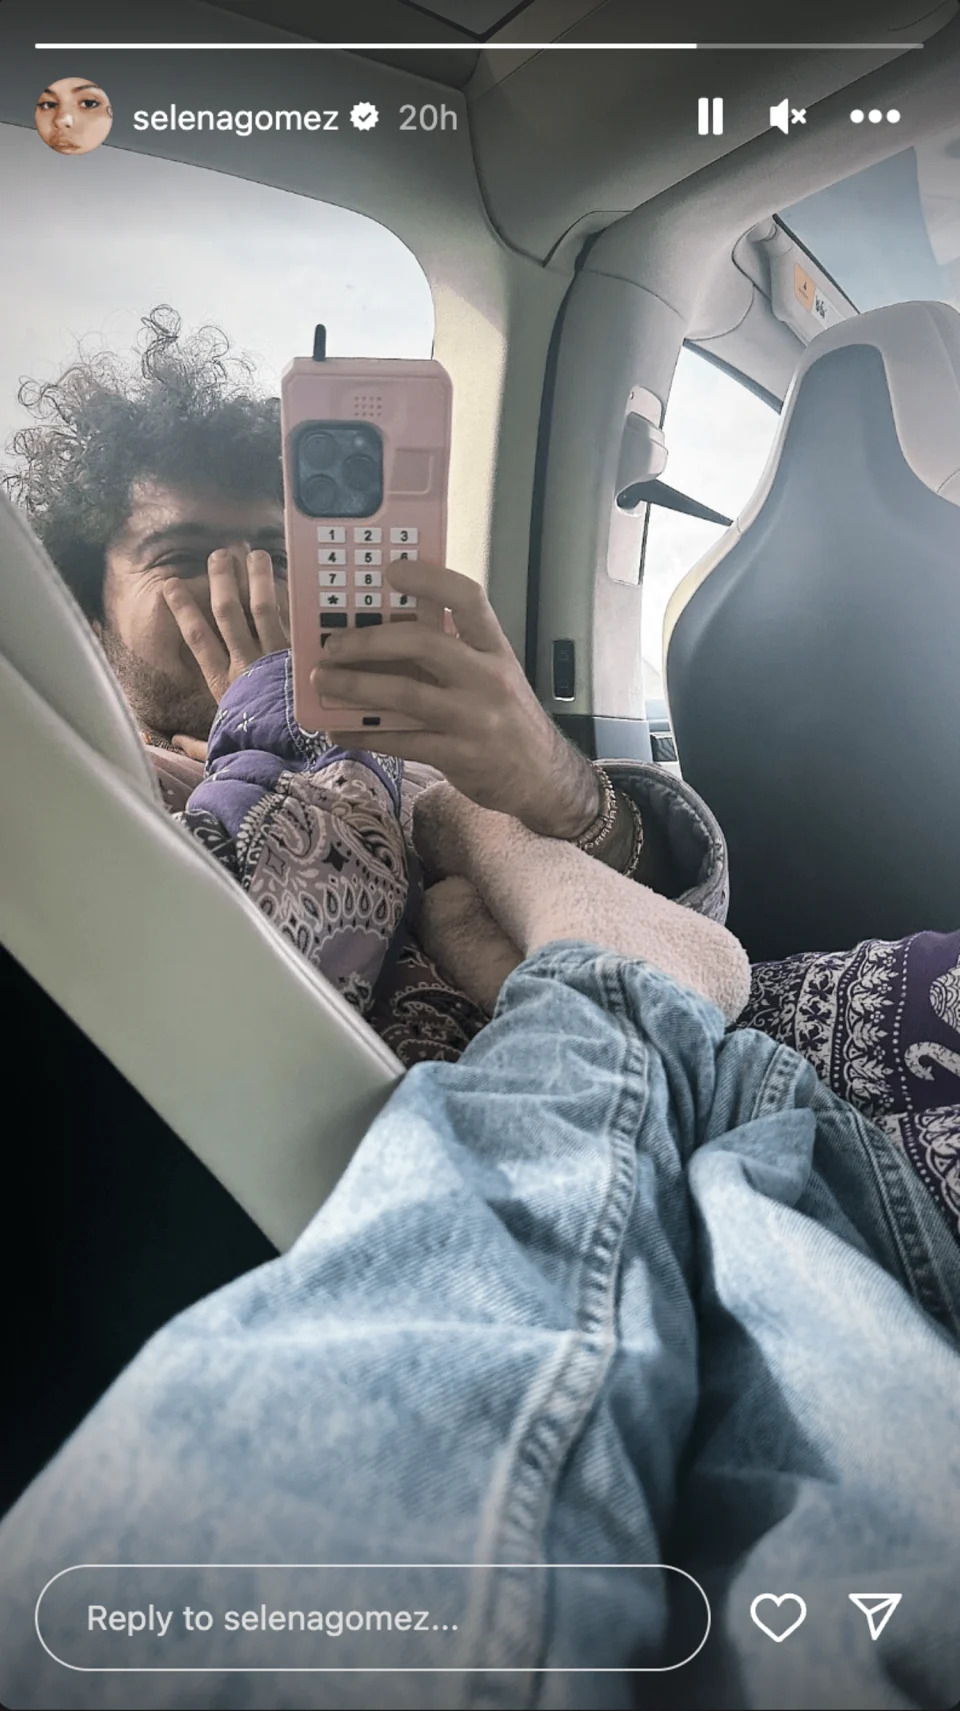 Gomez rubs her feet in fuzzy socks on Benny Blanco inside a vehicle. He's holding a pink iphone. (@selenagomez / Instagram)